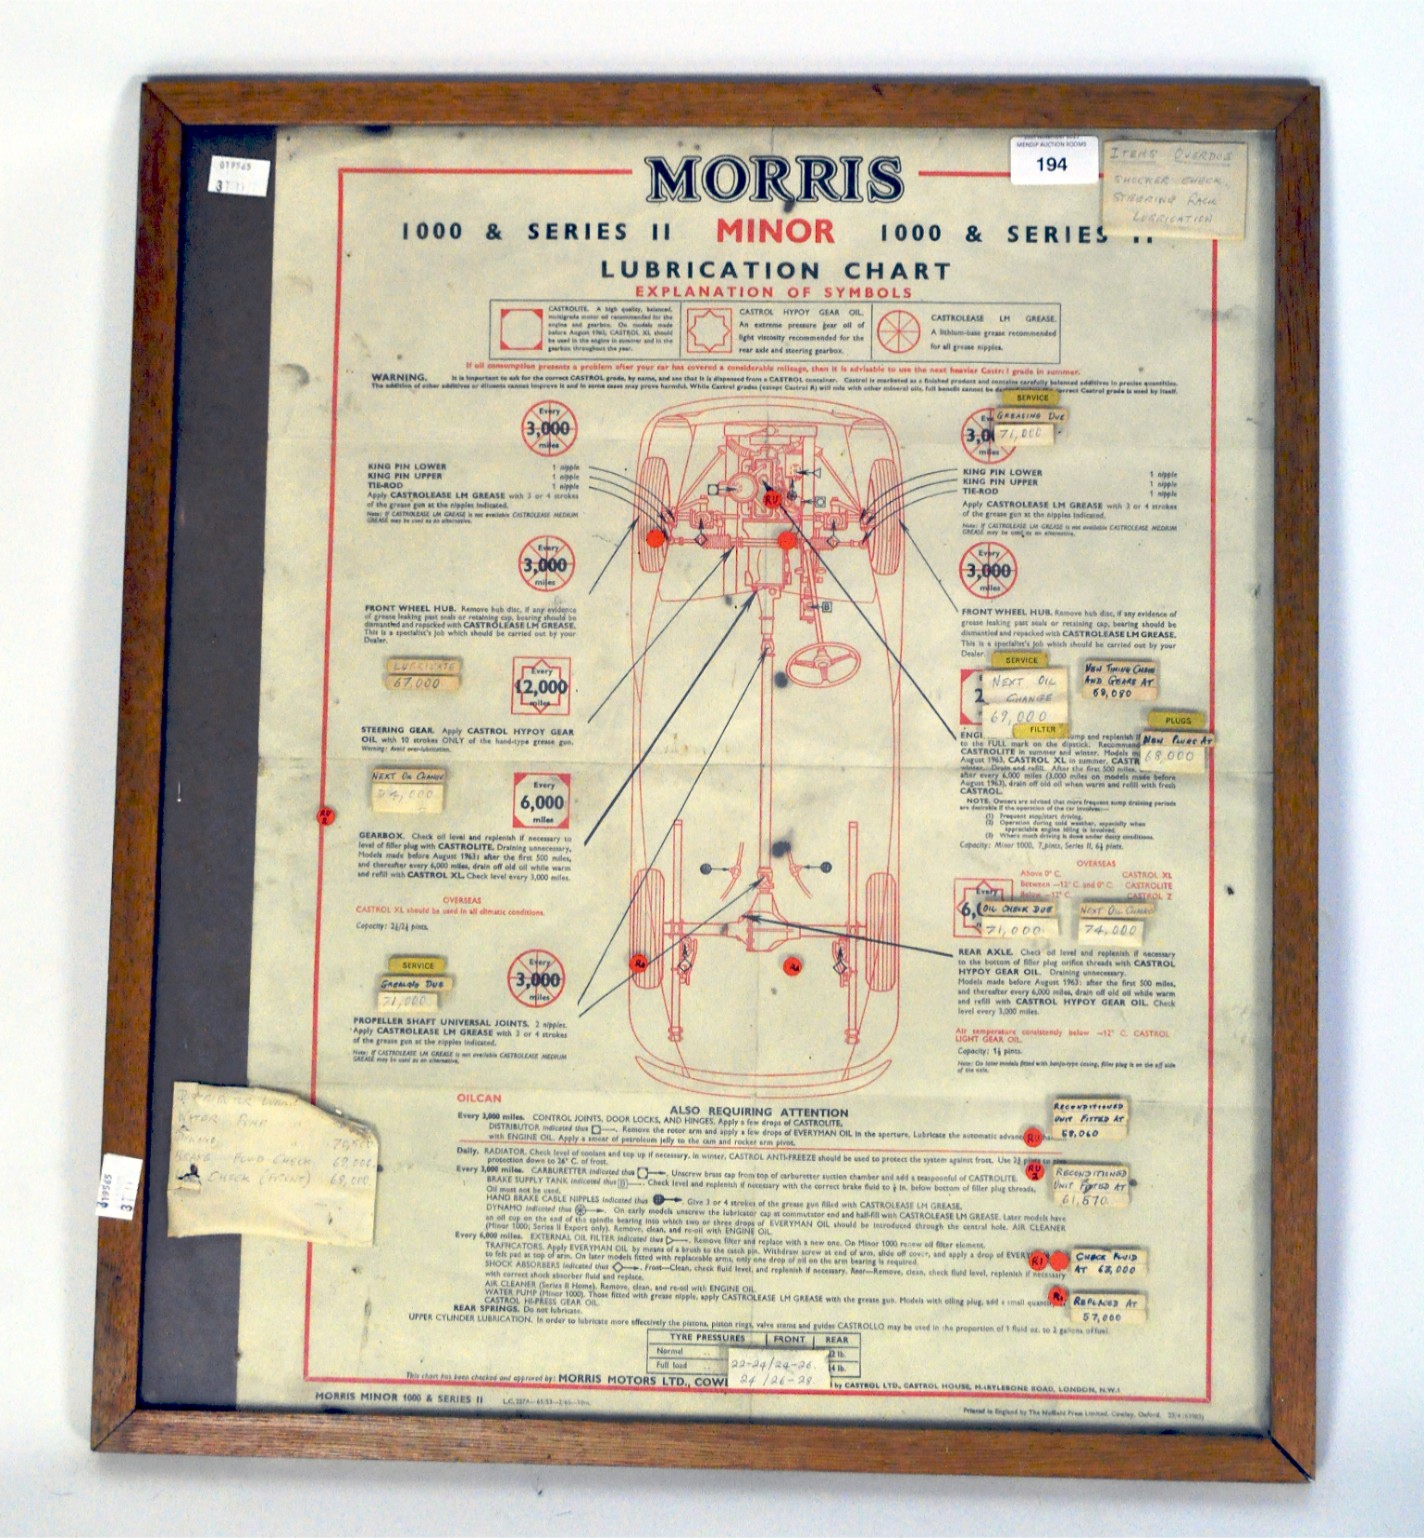 A vintage Morris Minor 1000 and series II lubrication chart, with explanation of symbols,